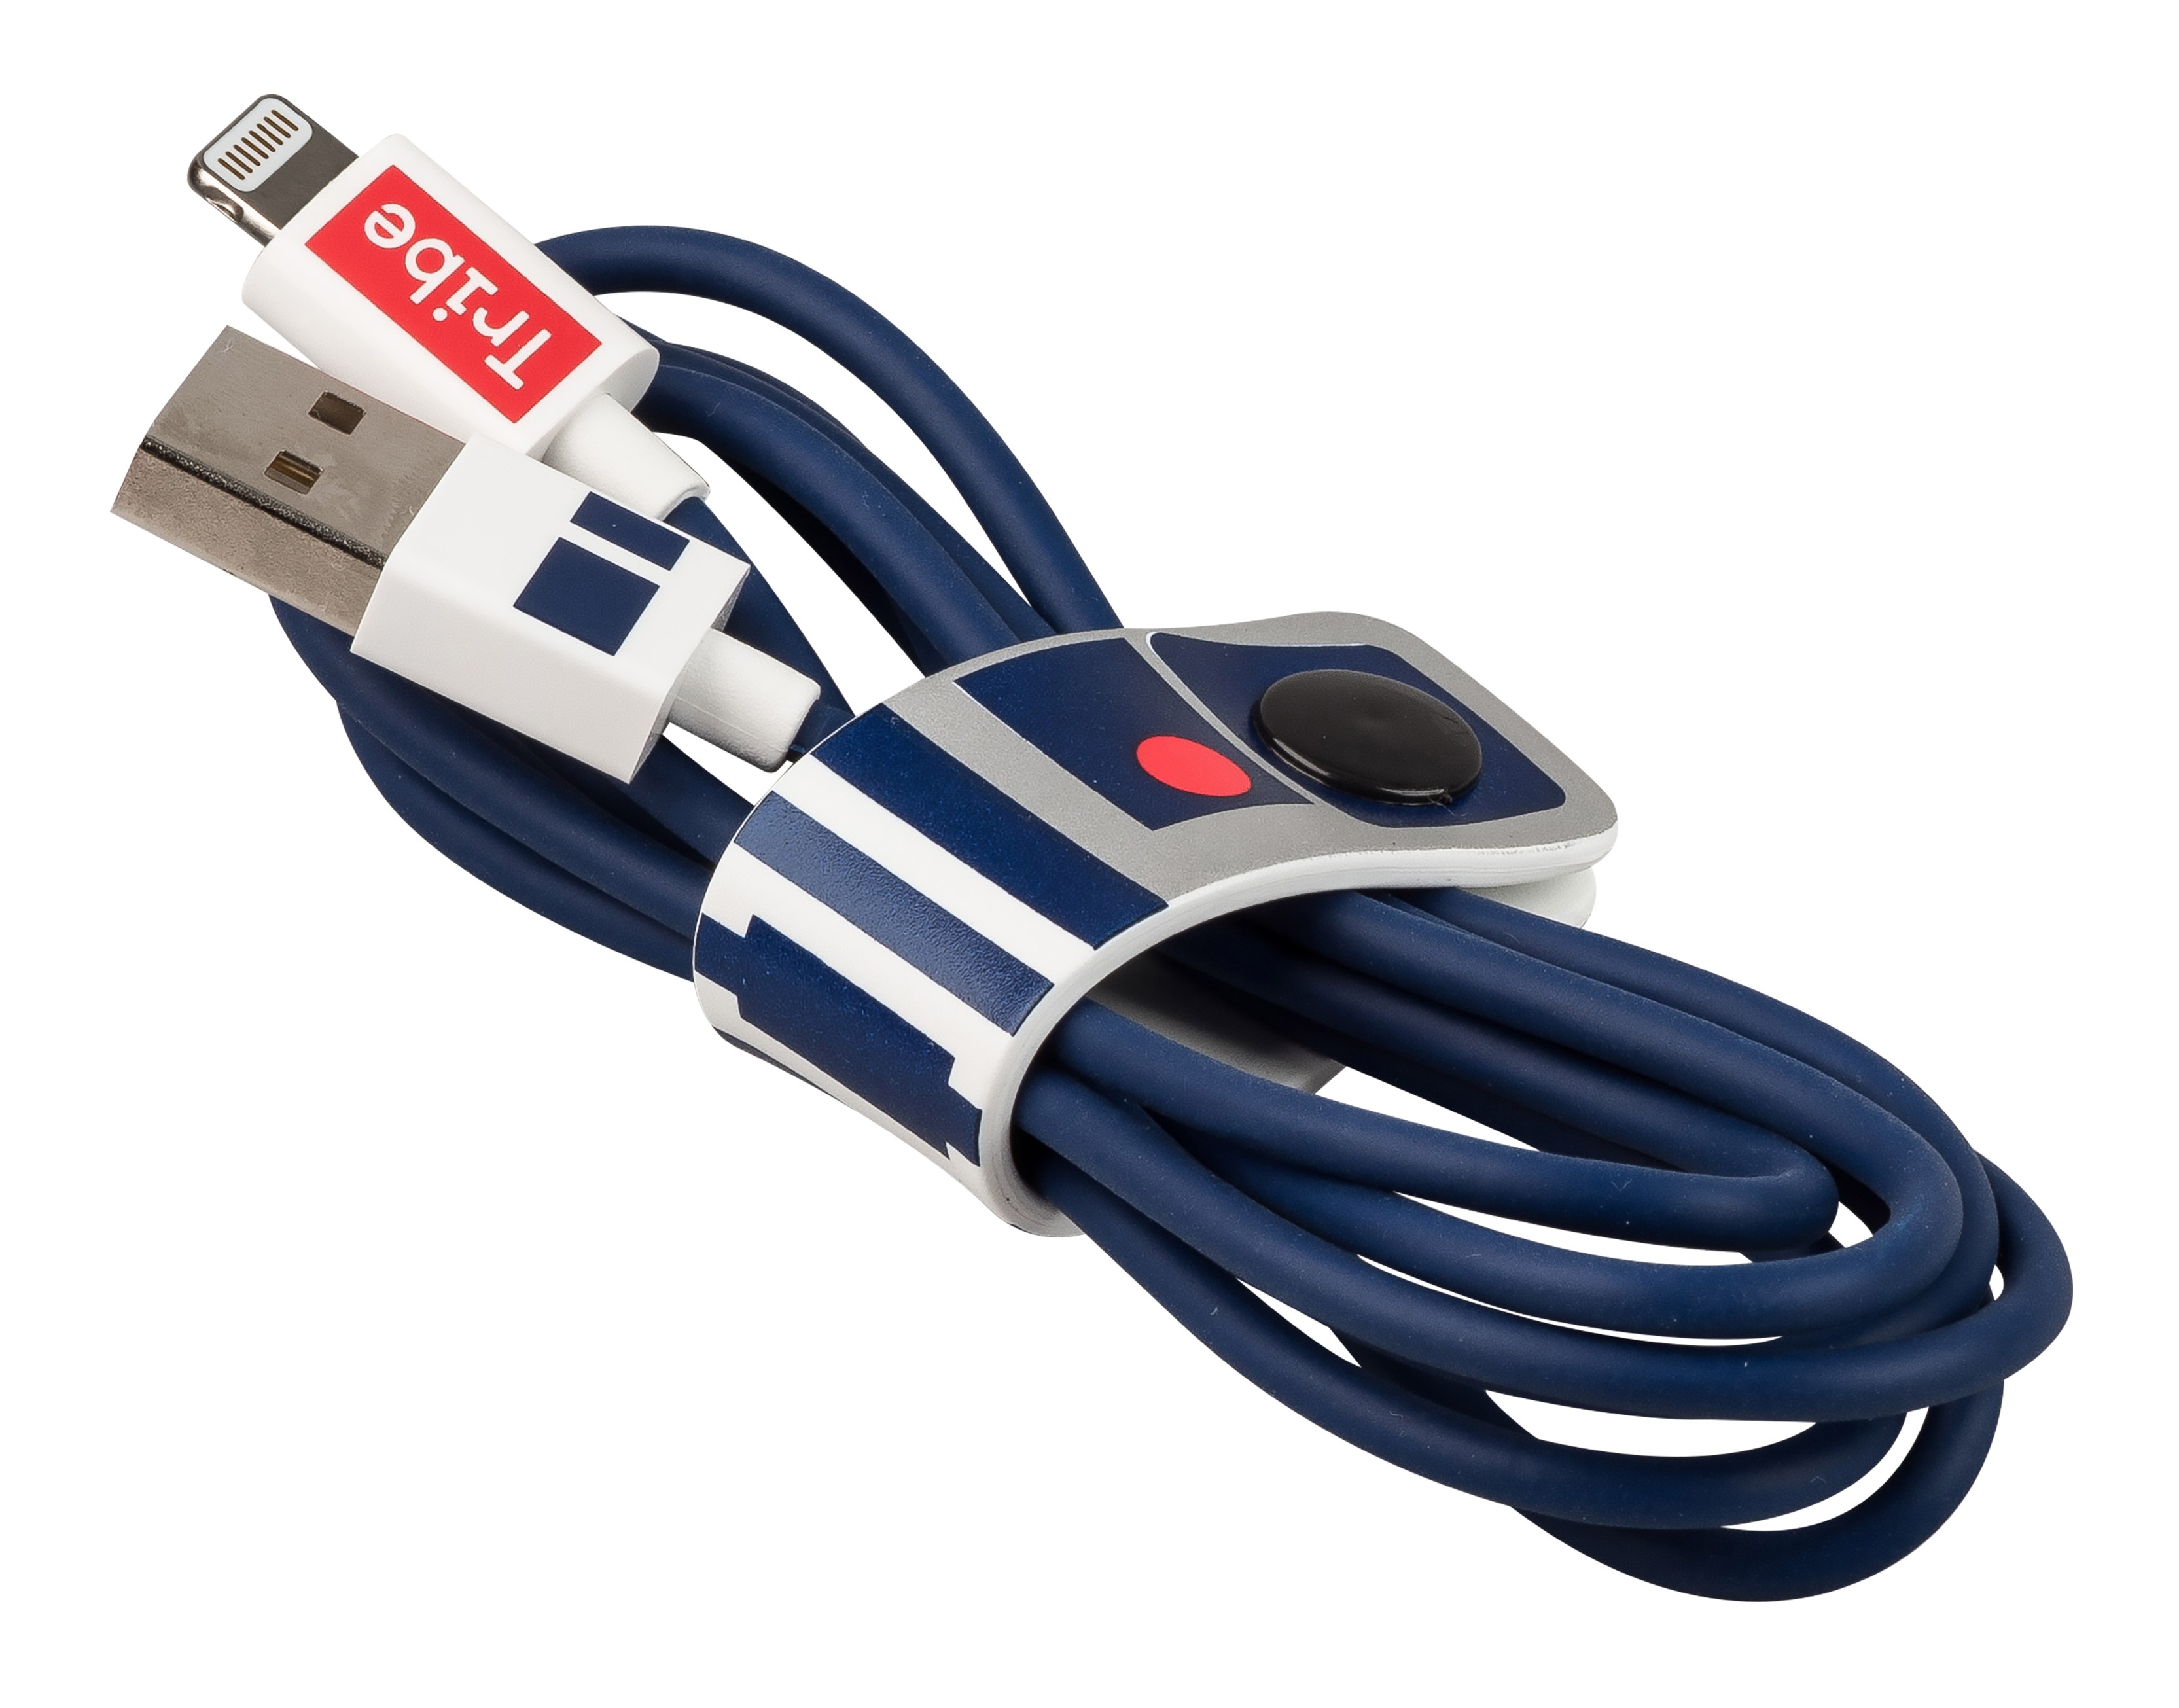 Tribe - R2-D2 - Star Wars - Lightning USB Cable - Data 